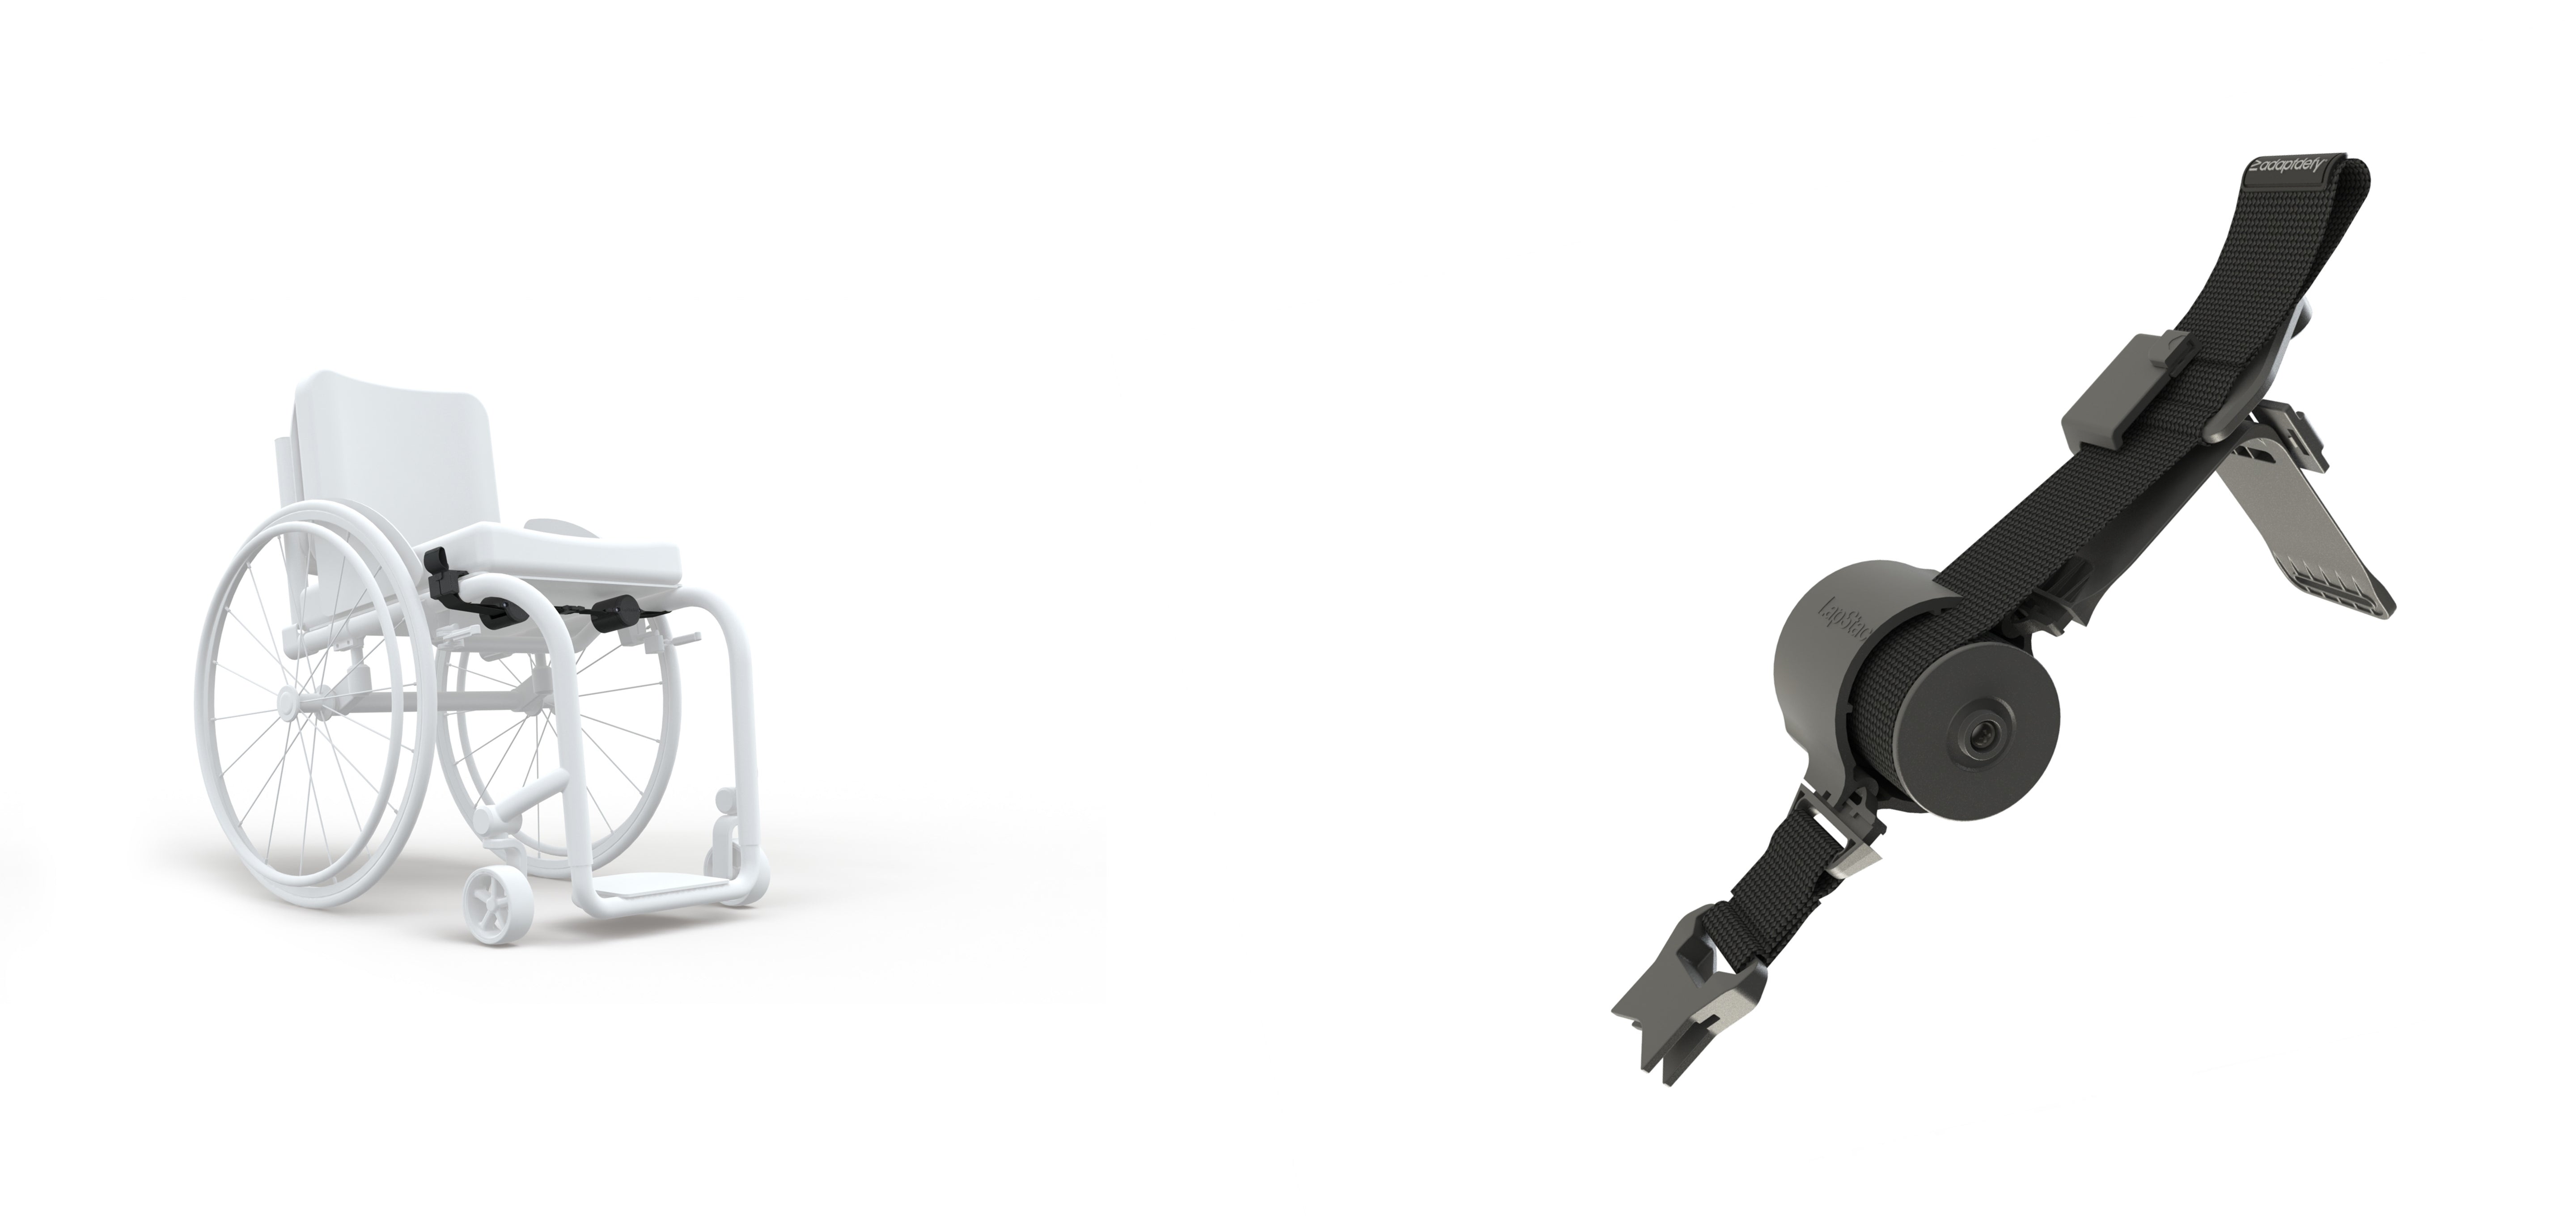 Render of LapStacker Flex installed on a manual wheelchair and an exploded view of one of the assemblies.